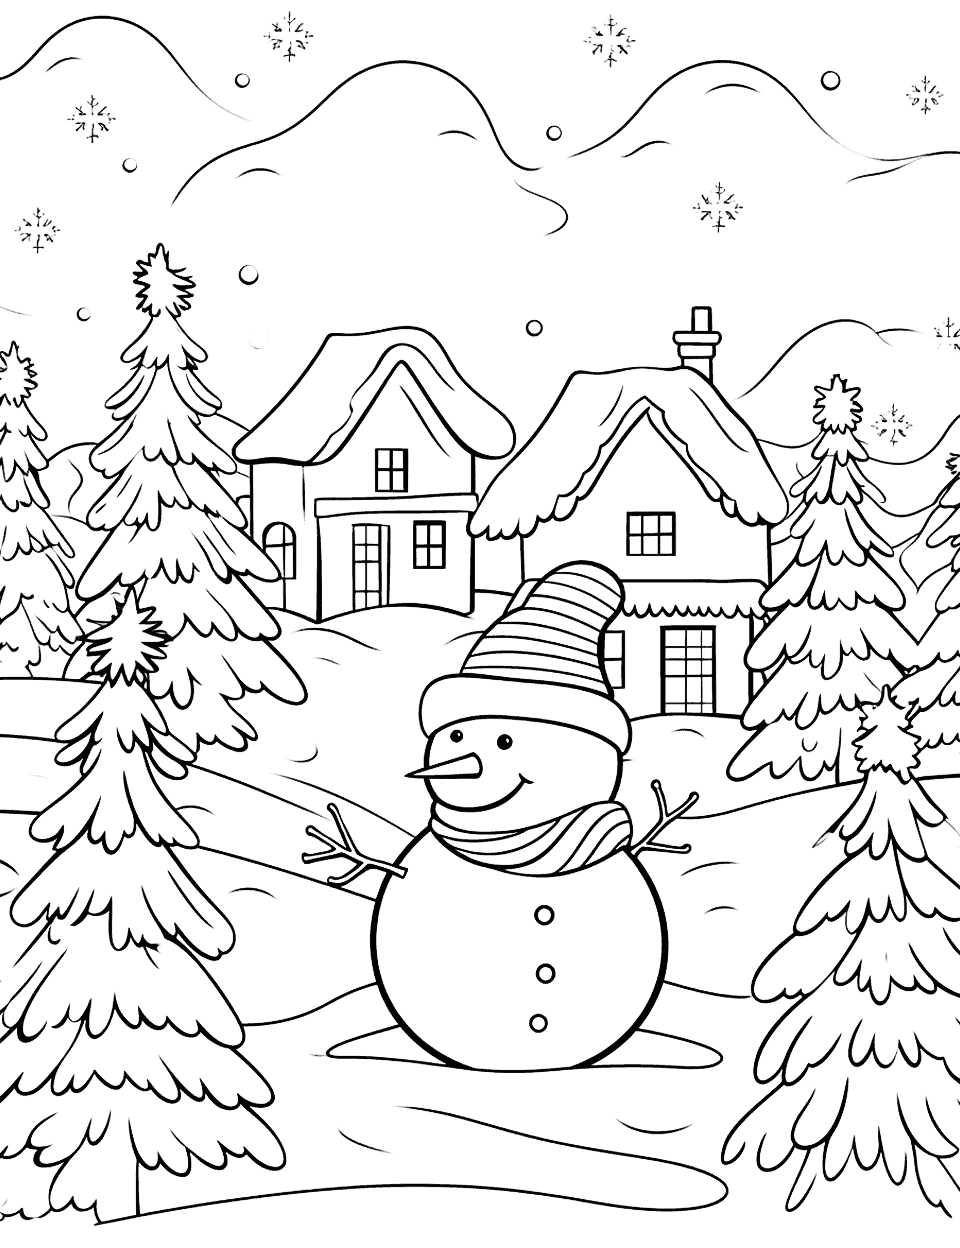 Art of Winter Coloring Page - Kids can recreate famous winter landscapes with their color choices.